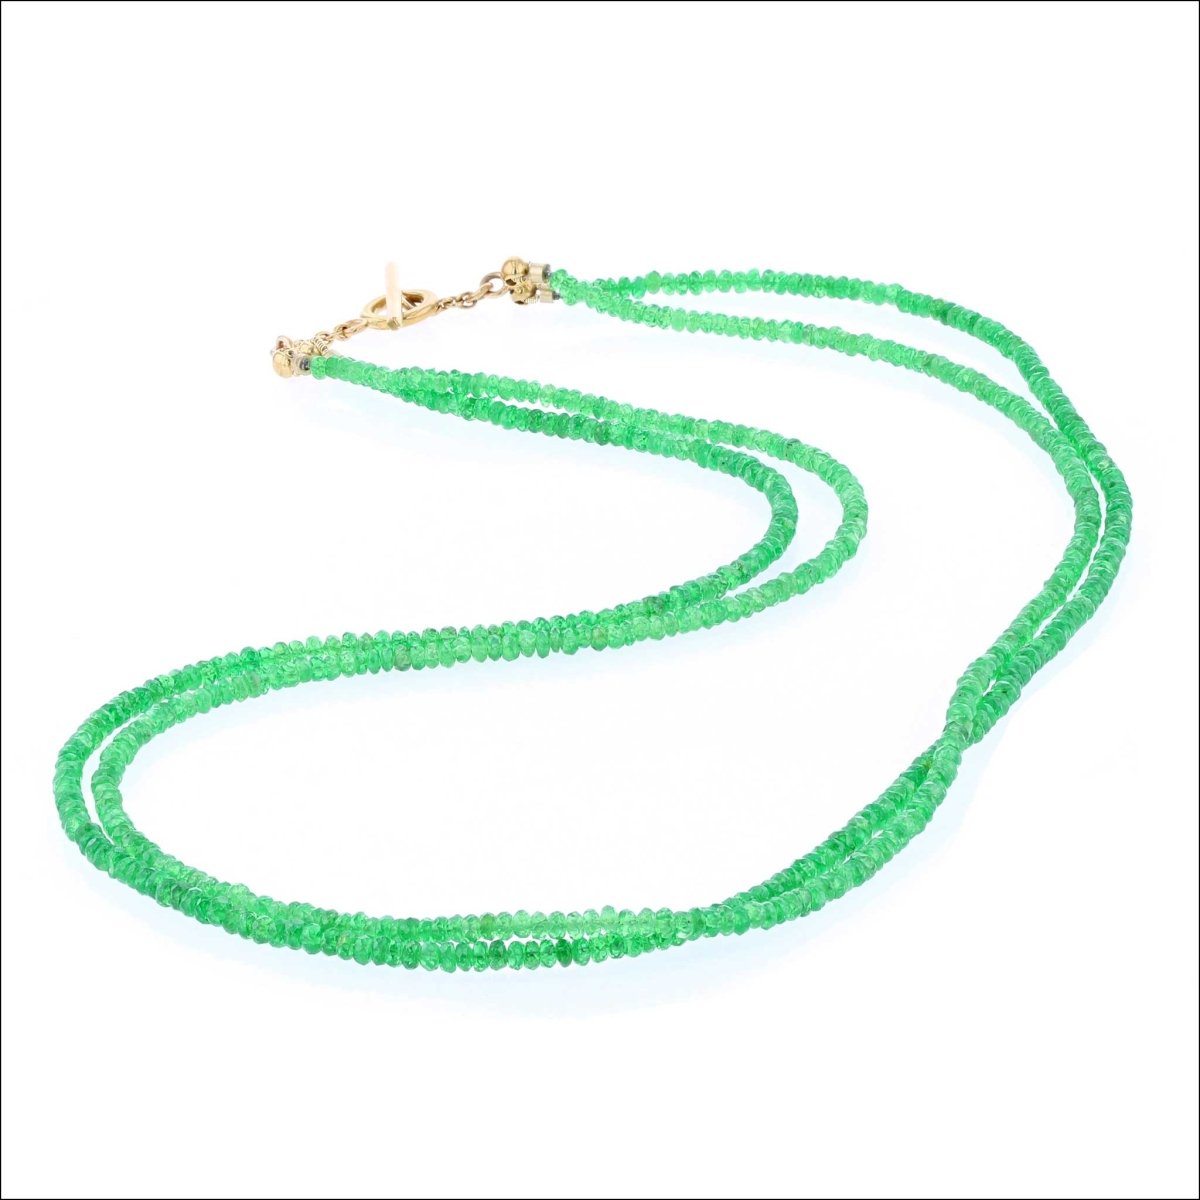 Tsavorite Garnet Bead Double Strand Necklace 17.5" 18KY (Consignment) - JewelsmithNecklaces